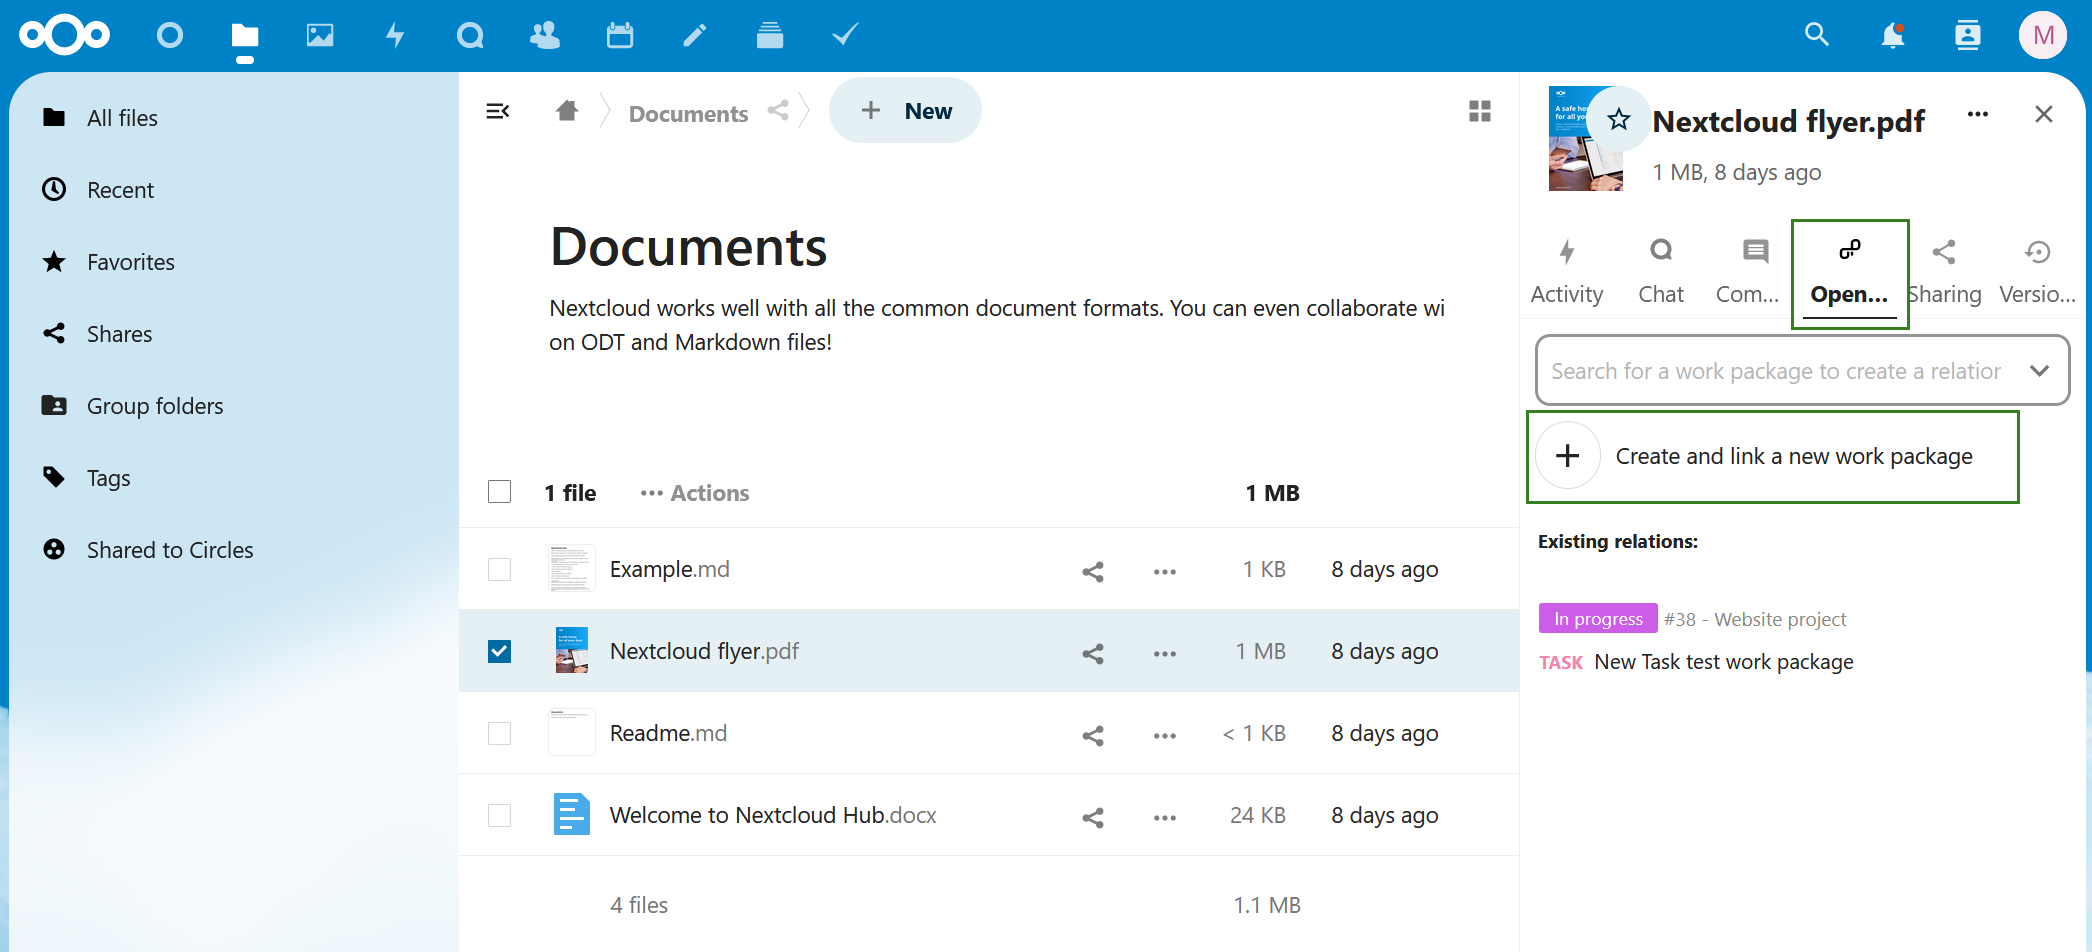 Create a new OpenProject work package from Nextcloud